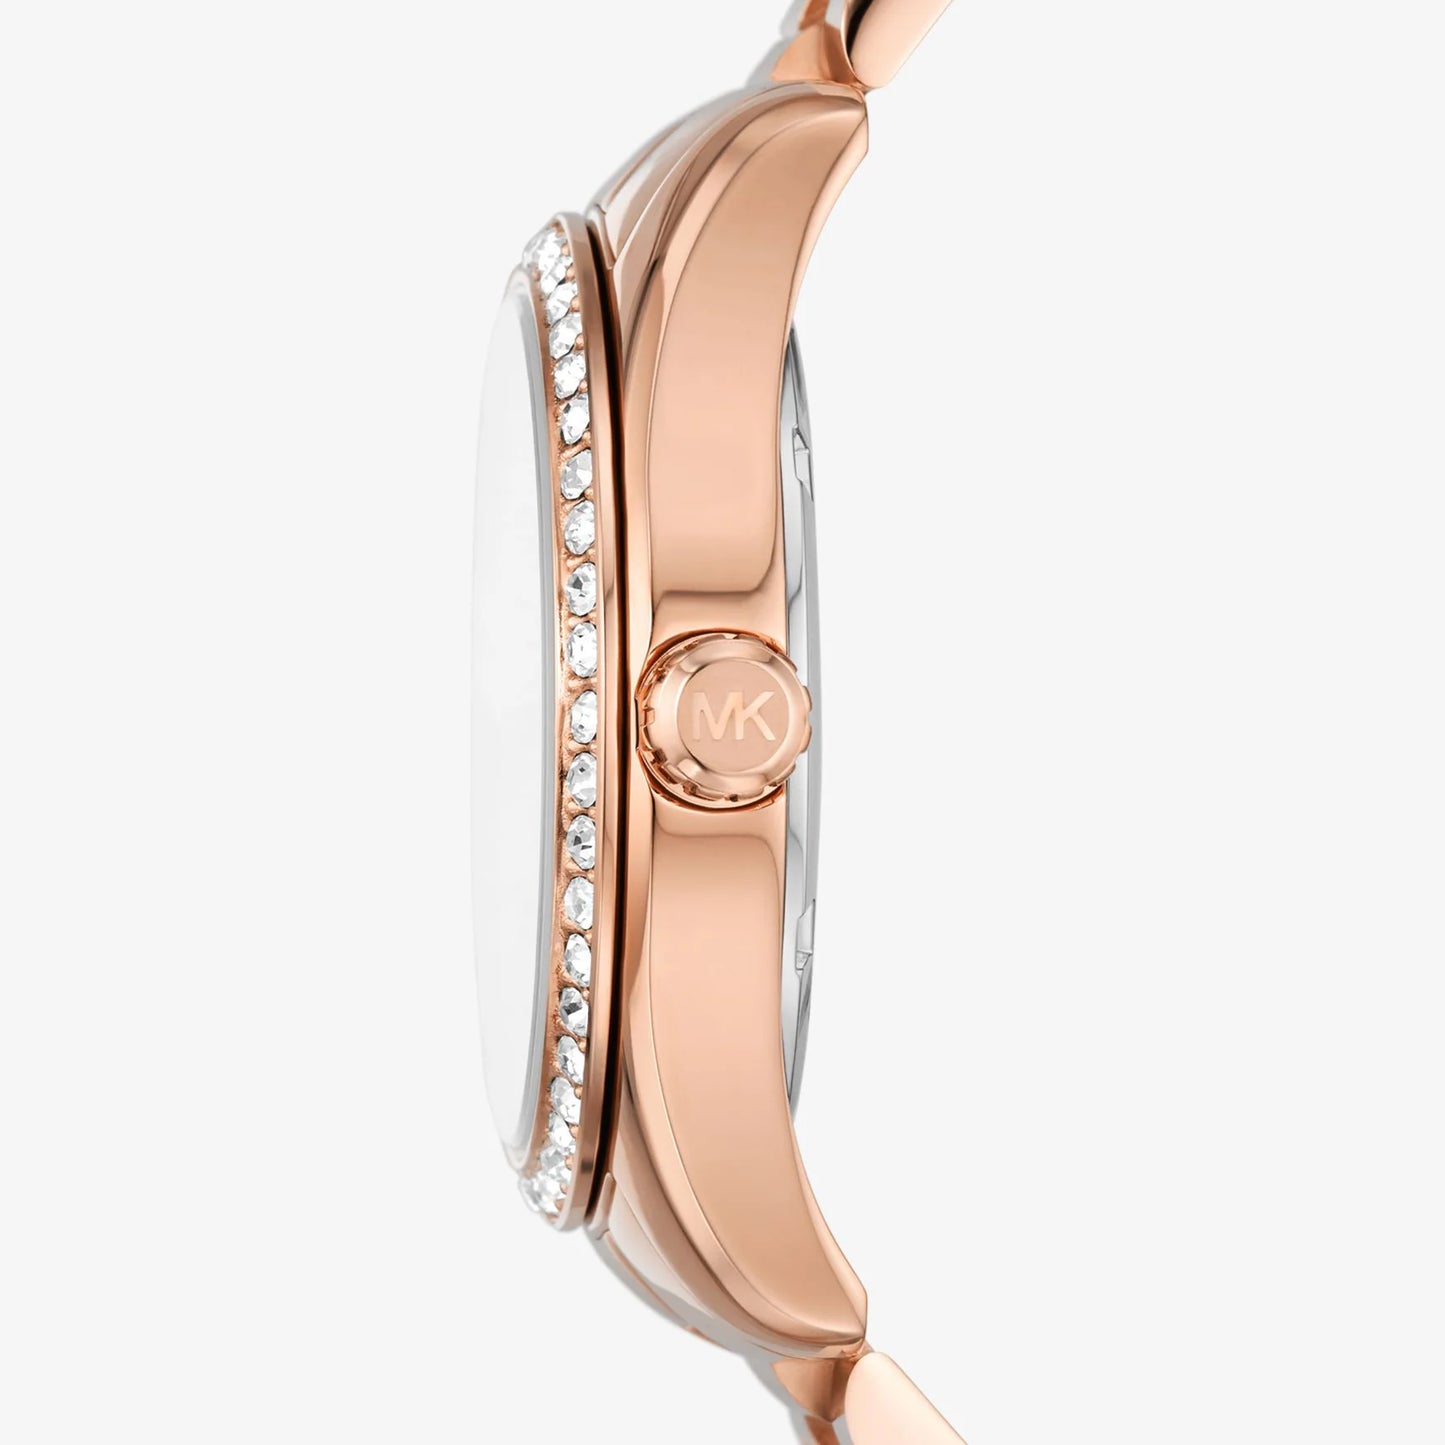 MICHAEL KORS LEXINGTON THREE-HAND ROSE GOLD-TONE STAINLESS STEEL WATCH AND JEWELRY GIFT SET - MK1088SET